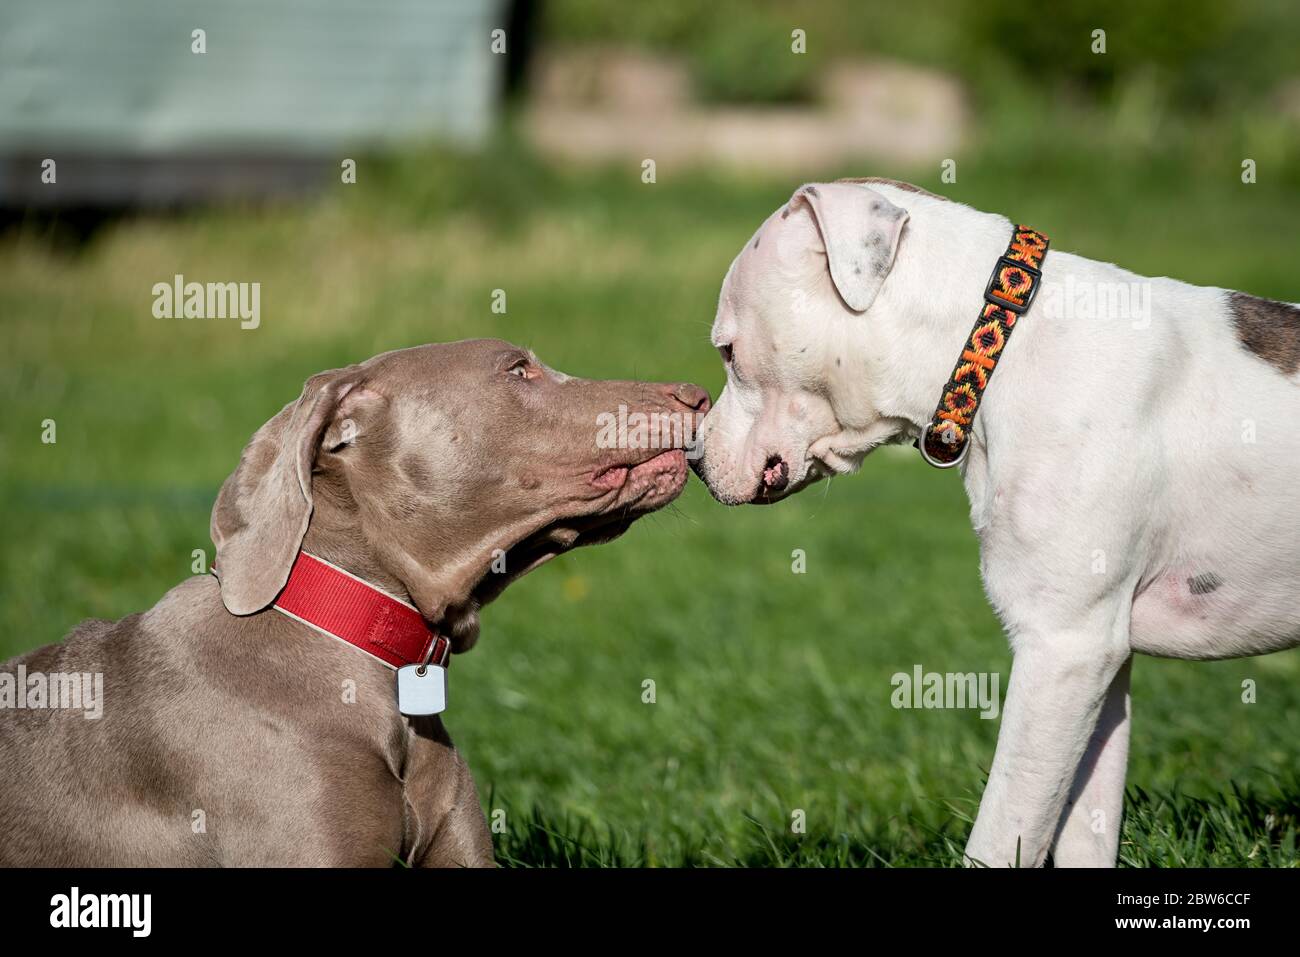 Dog fun. Two young Weimaraner and Pitbull dogs in play. Socialization of dogs, biting inhibition exercise and calming signals. Stock Photo